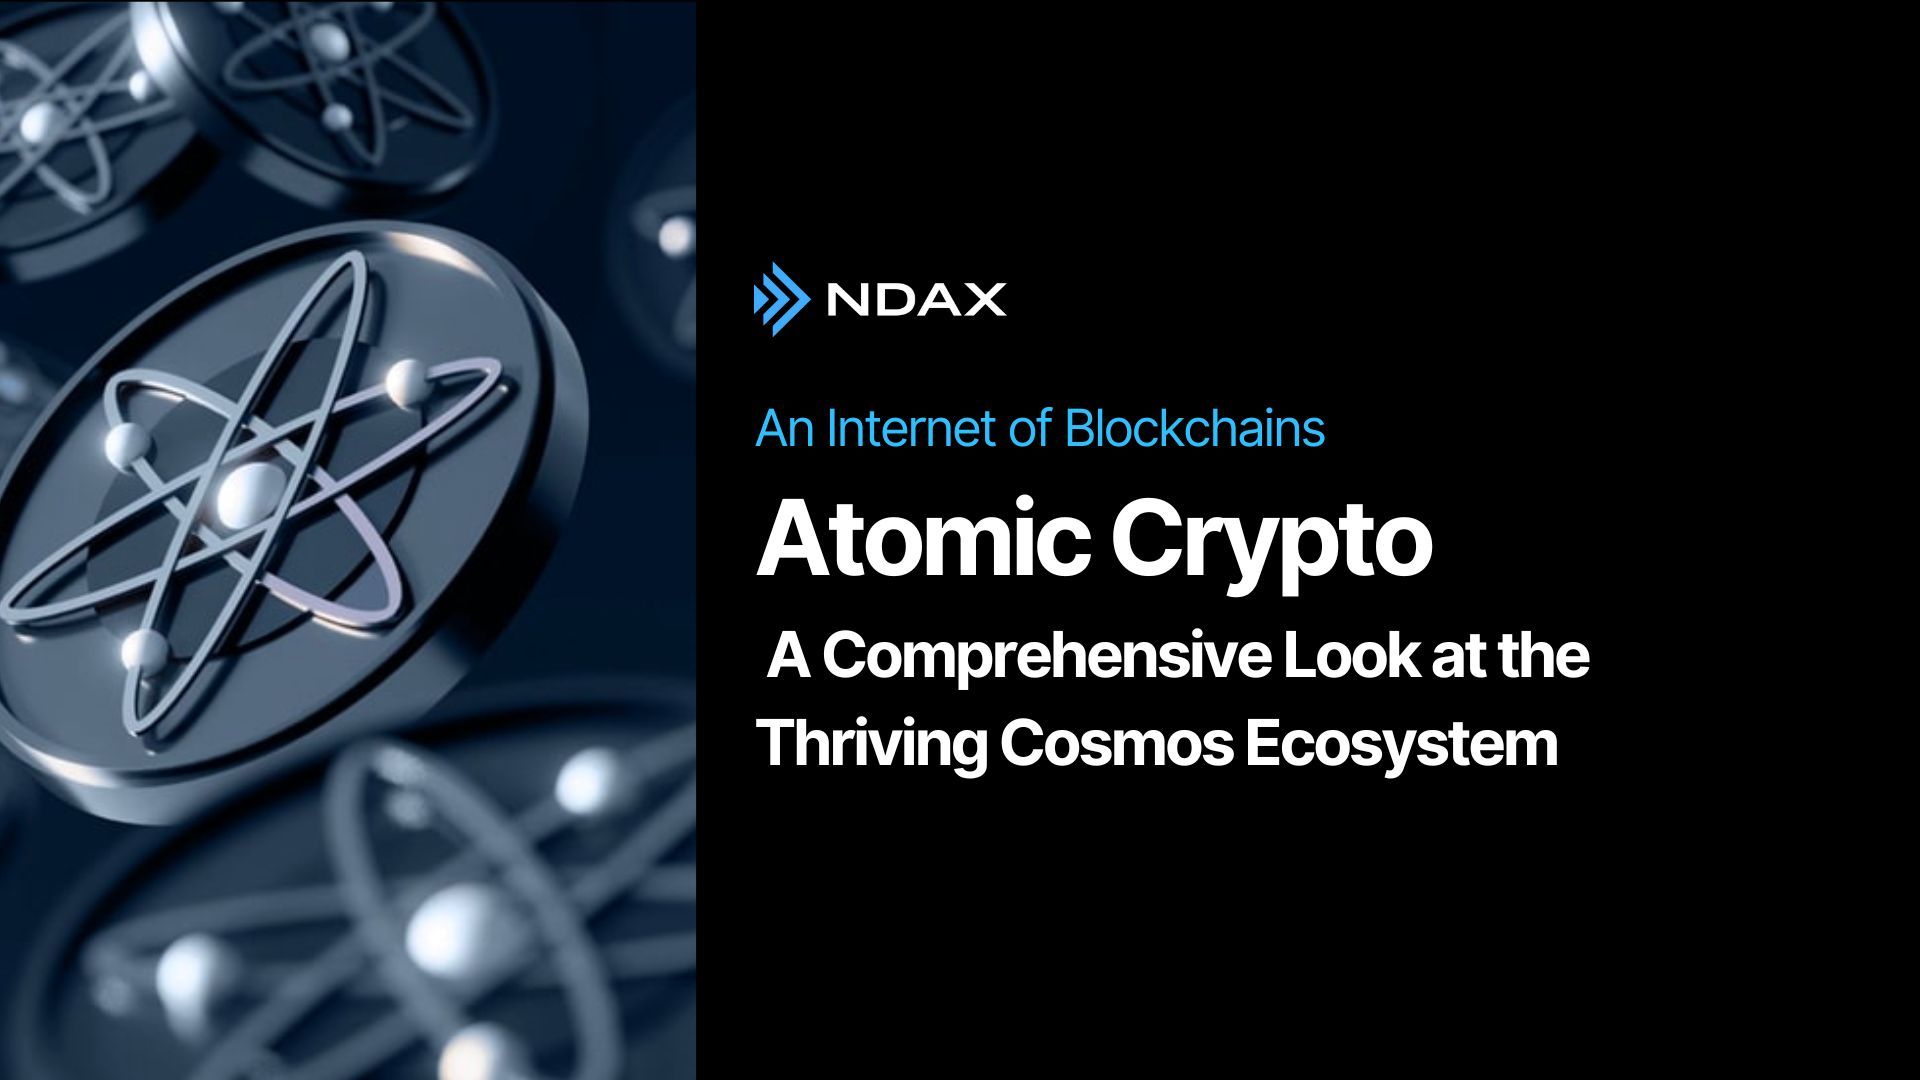 Atomic Crypto: A Comprehensive Look at the Thriving Cosmos Ecosystem